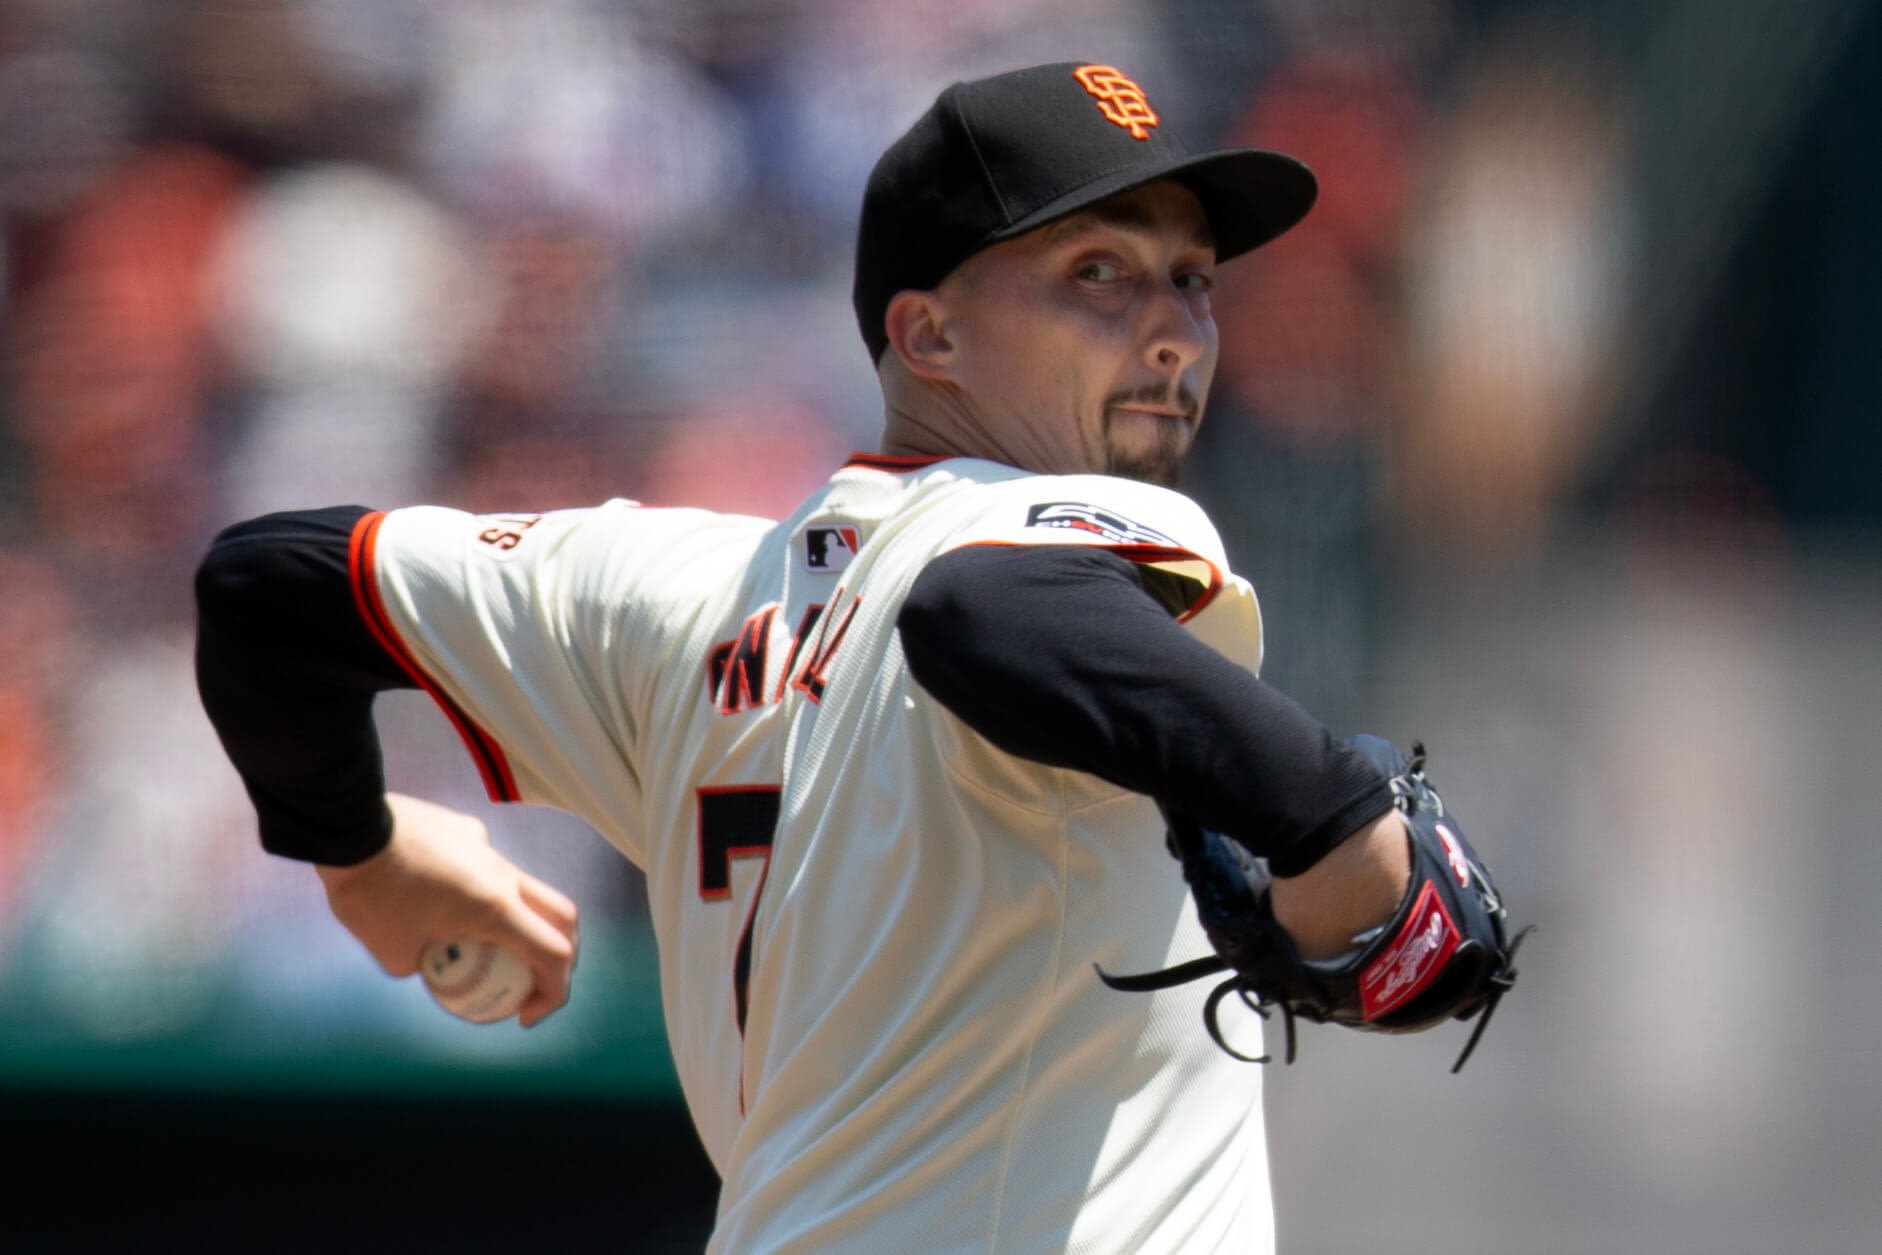 Giants week in review: Blake Snell Cy Young-like, Mike Yastrzemski ice cold (in a good way)